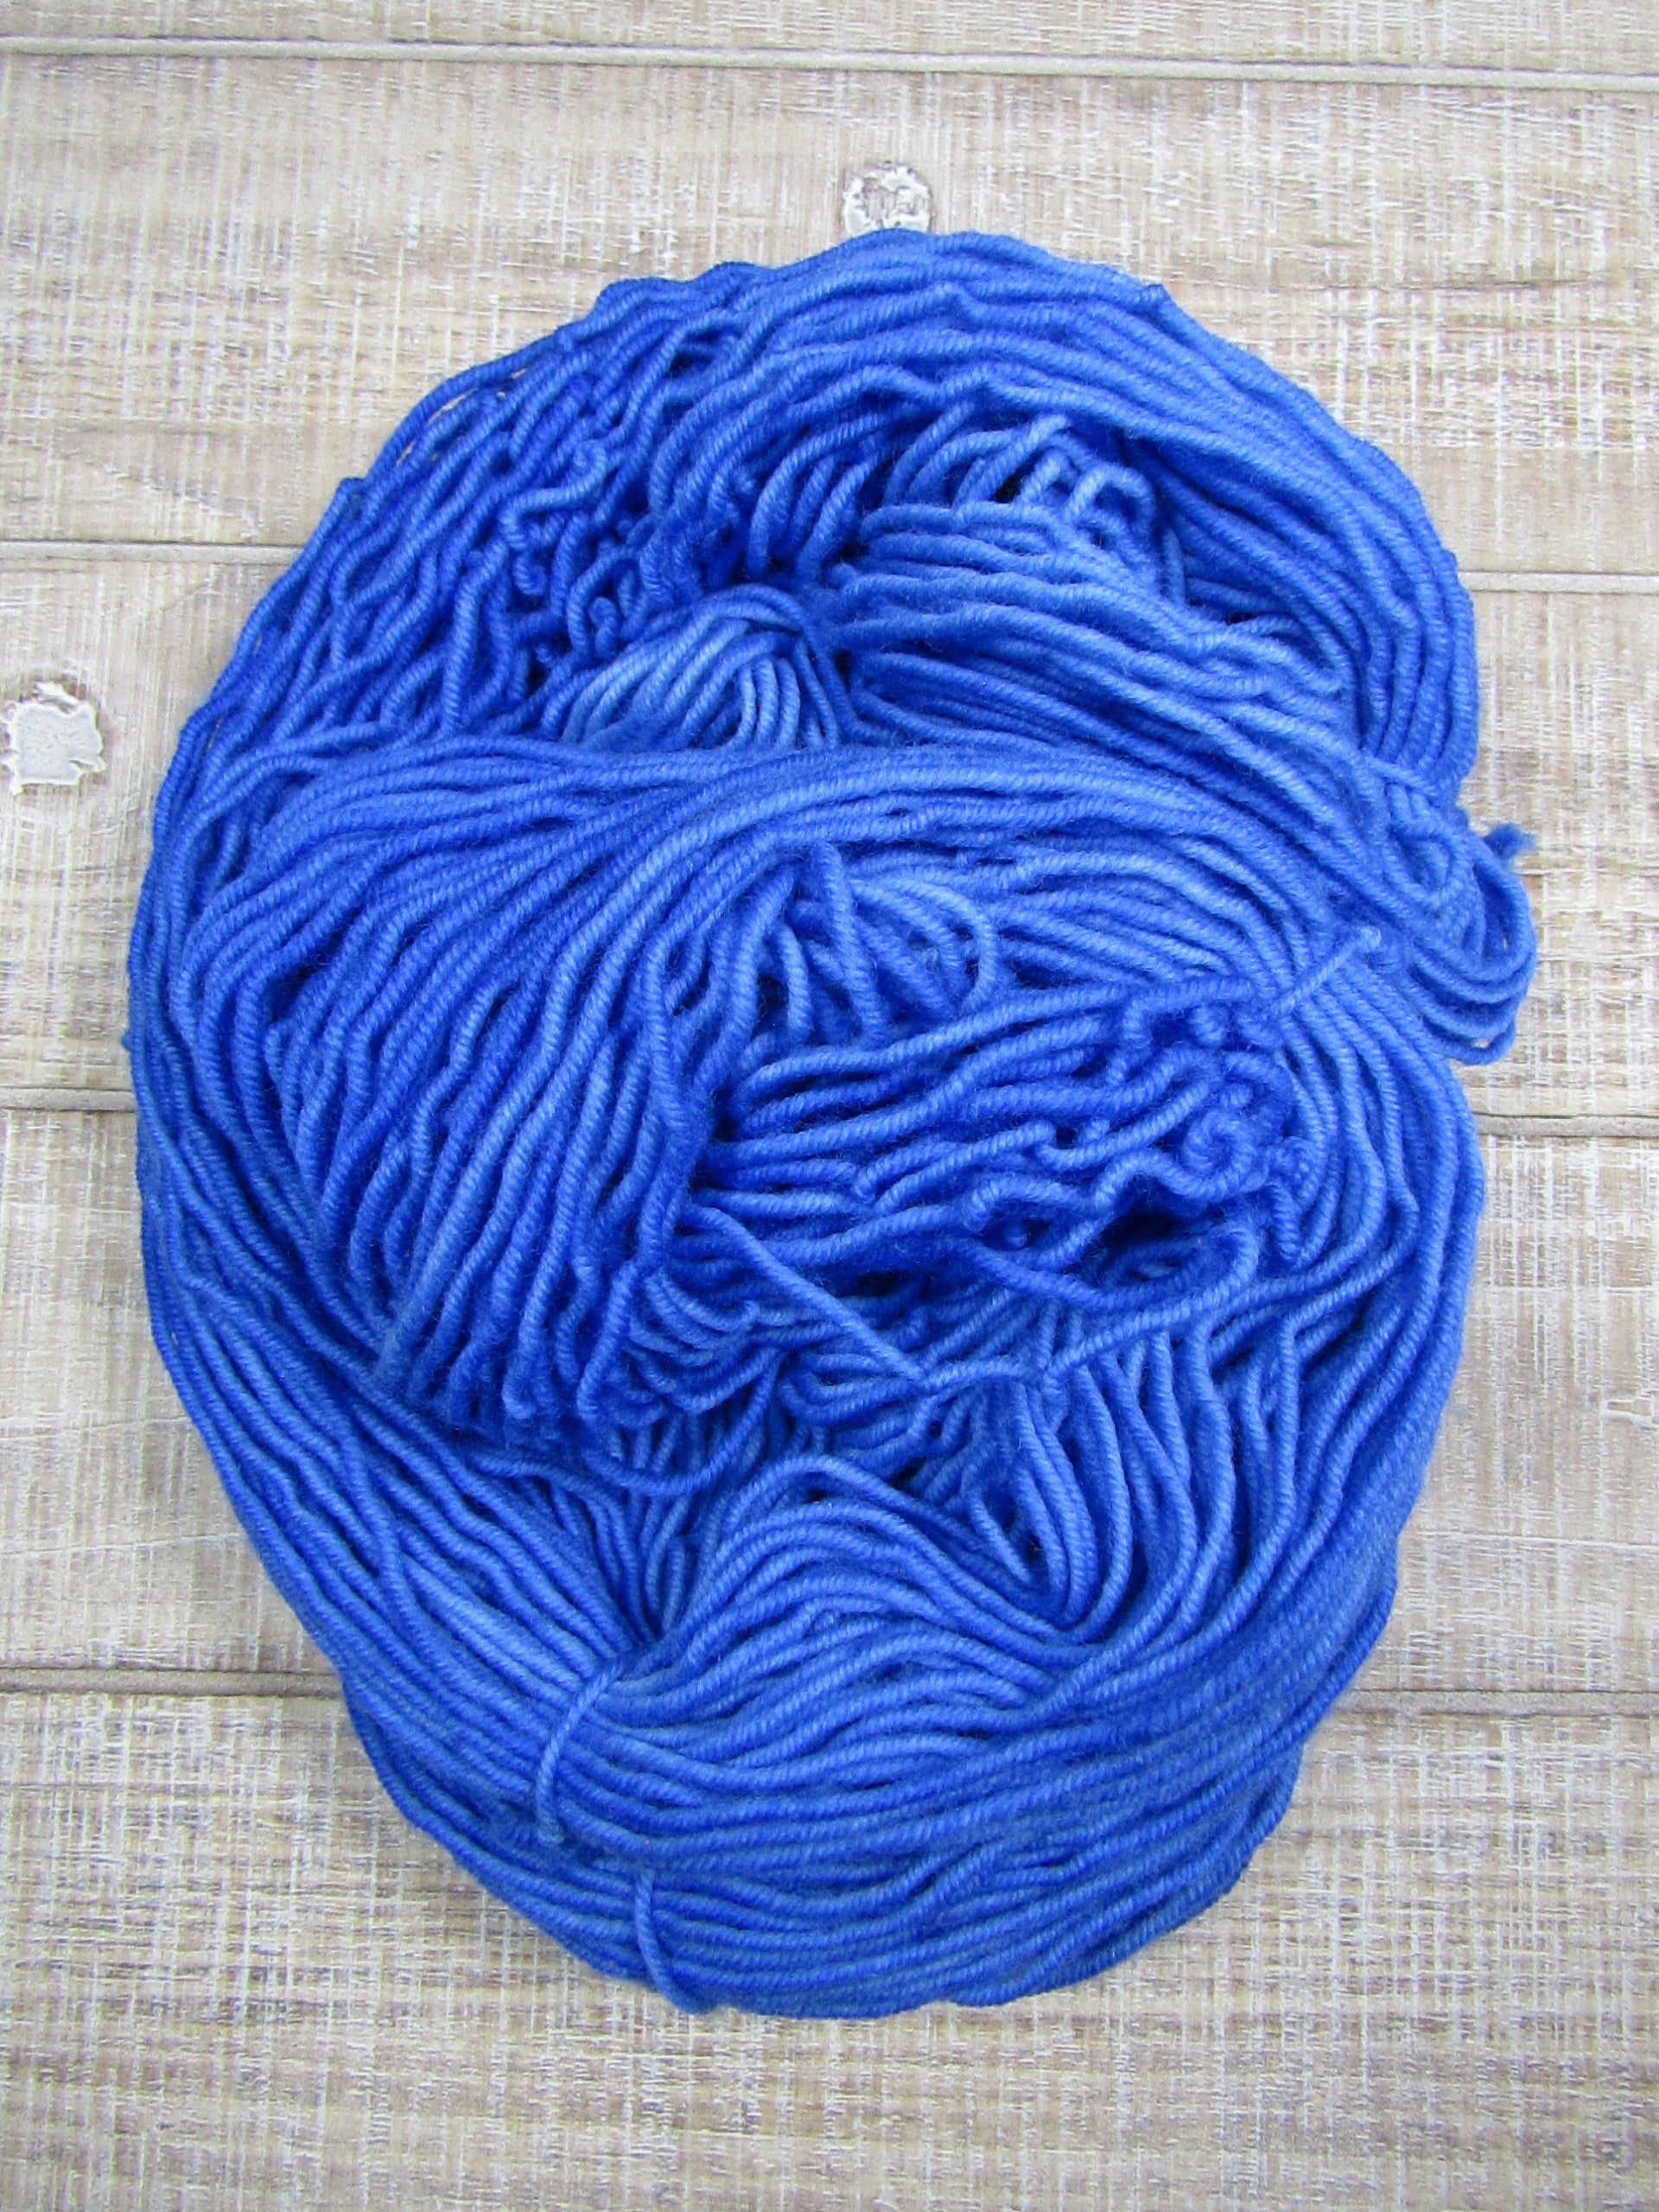 Hand-dyed yarn - Sapphire Merino/Cashstyle nylon worsted weight yarn in a sapphire blue color.